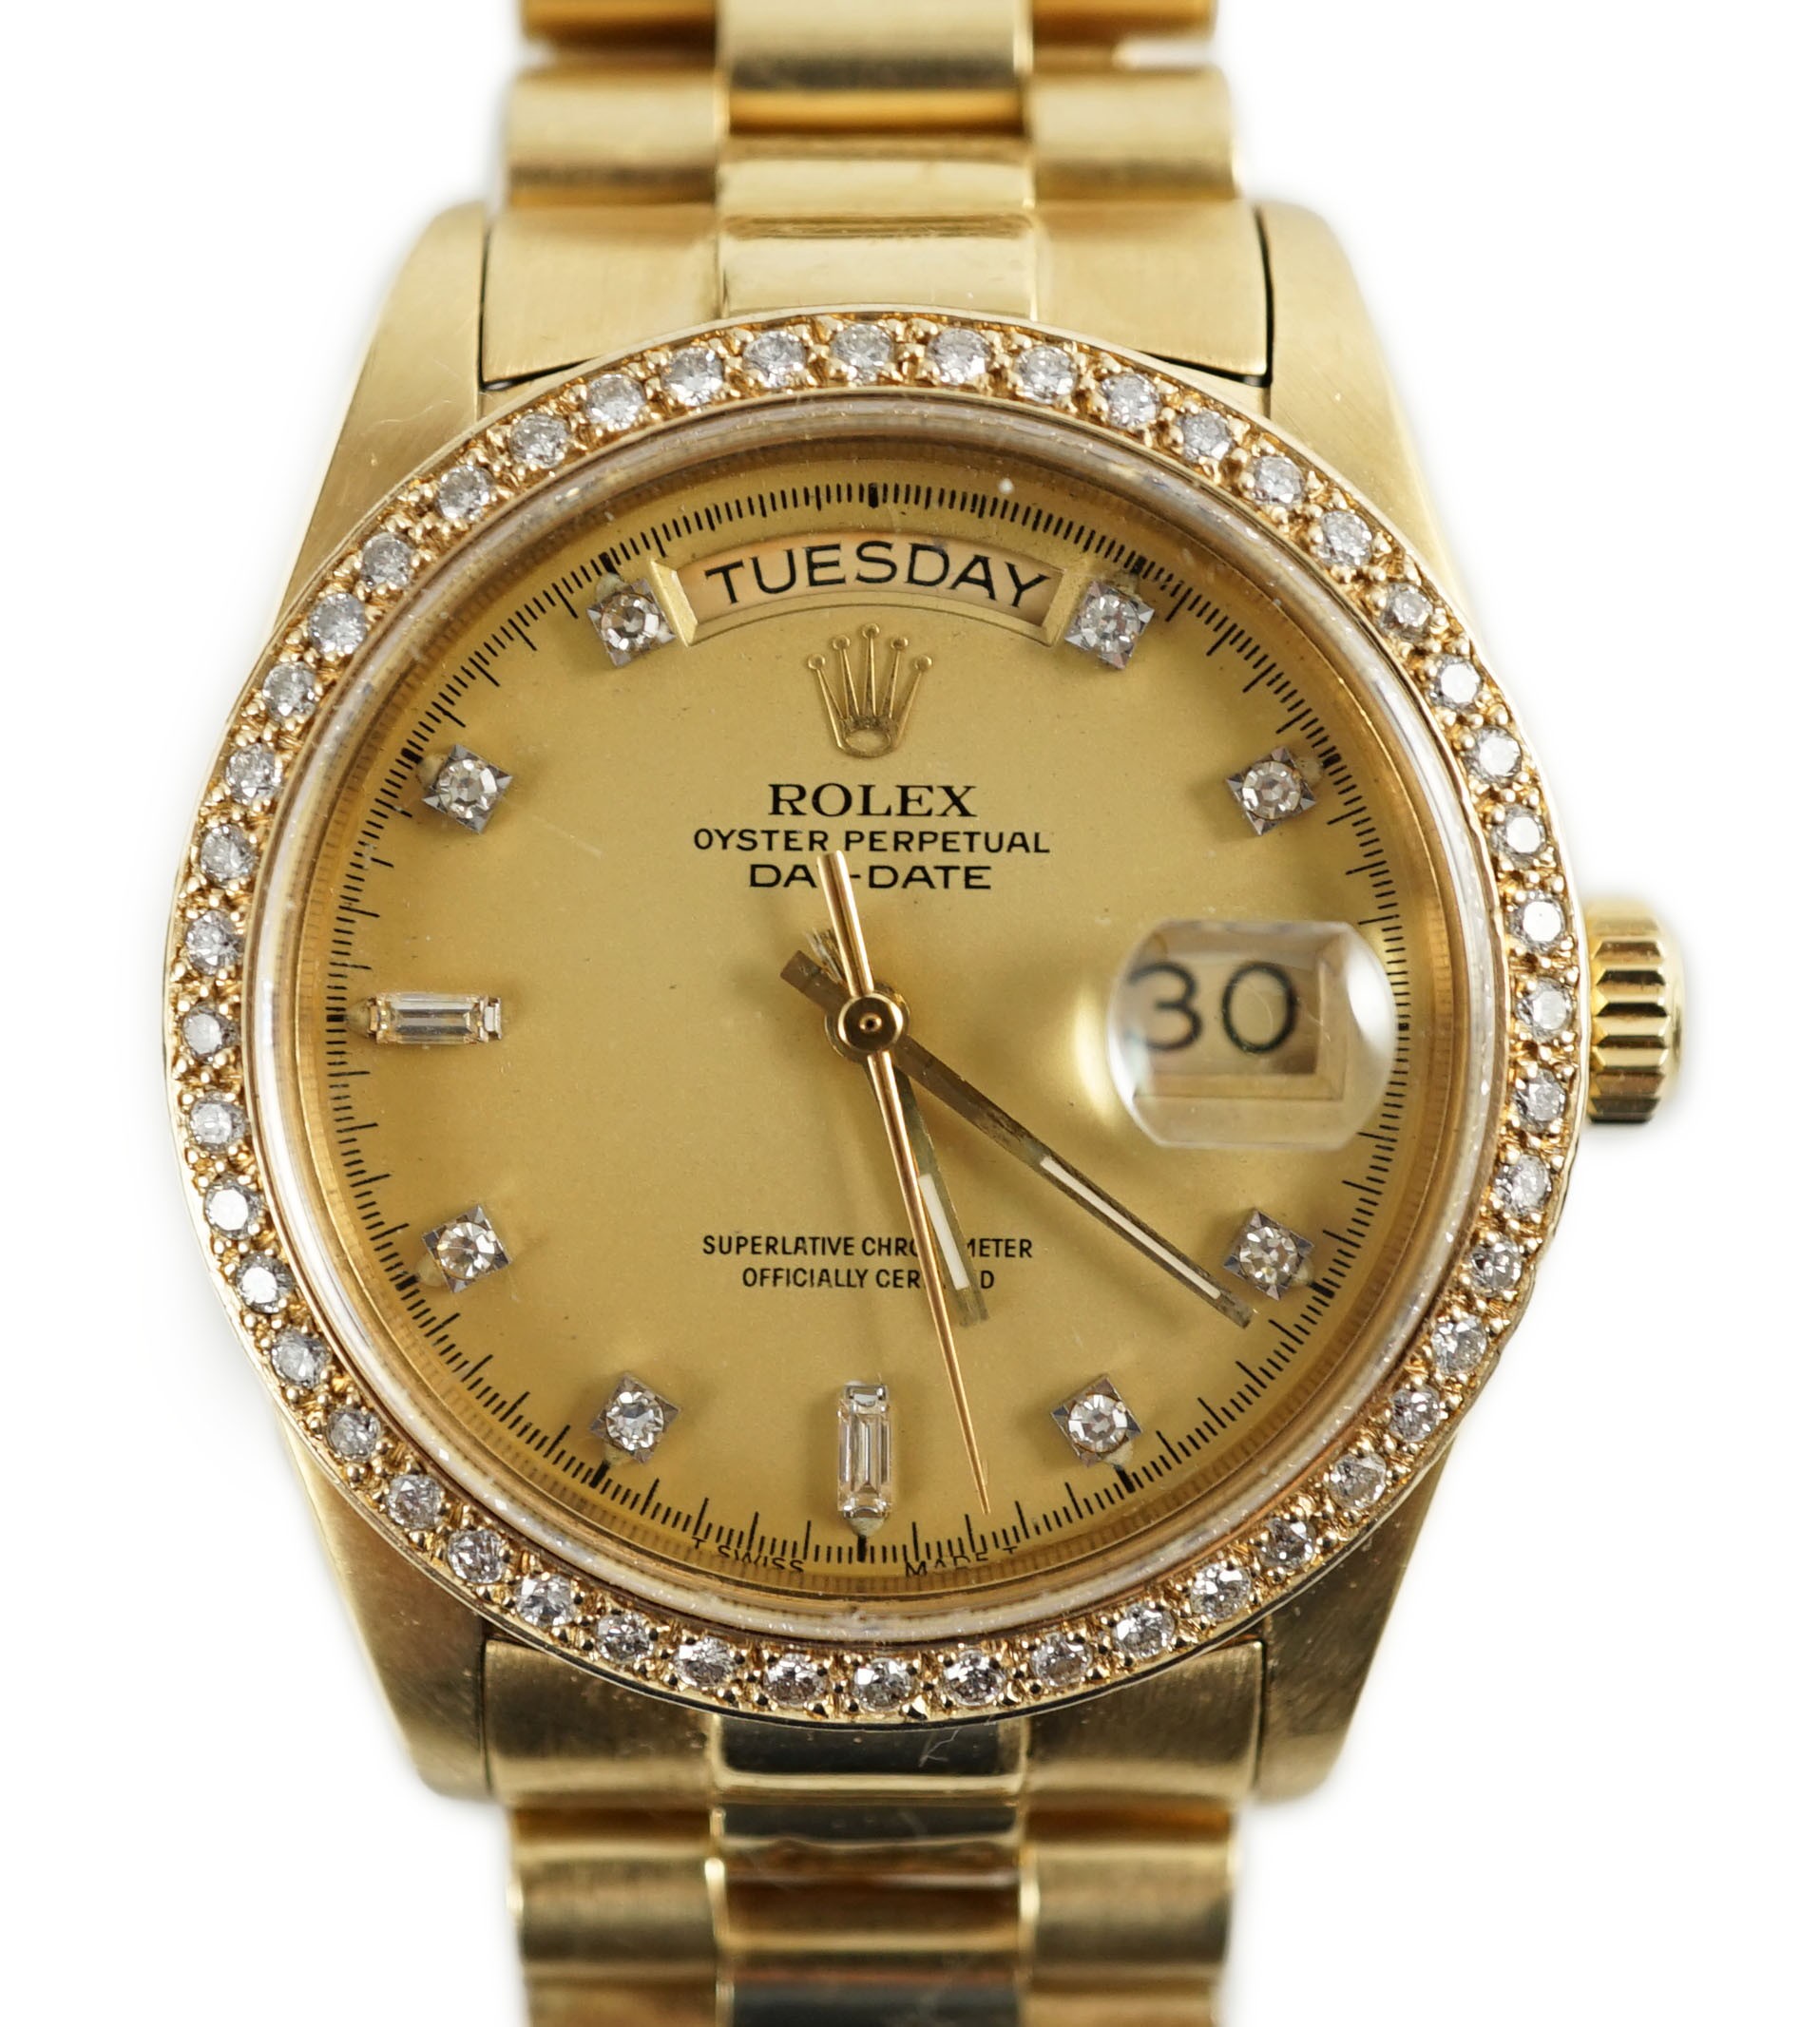 A gentleman's late 1970's 18ct gold Rolex Oyster Perpetual Day-Date wrist watch, with after market diamond set bezel and diamond set markers, on an 18ct gold Rolex bracelet with deployment clasp